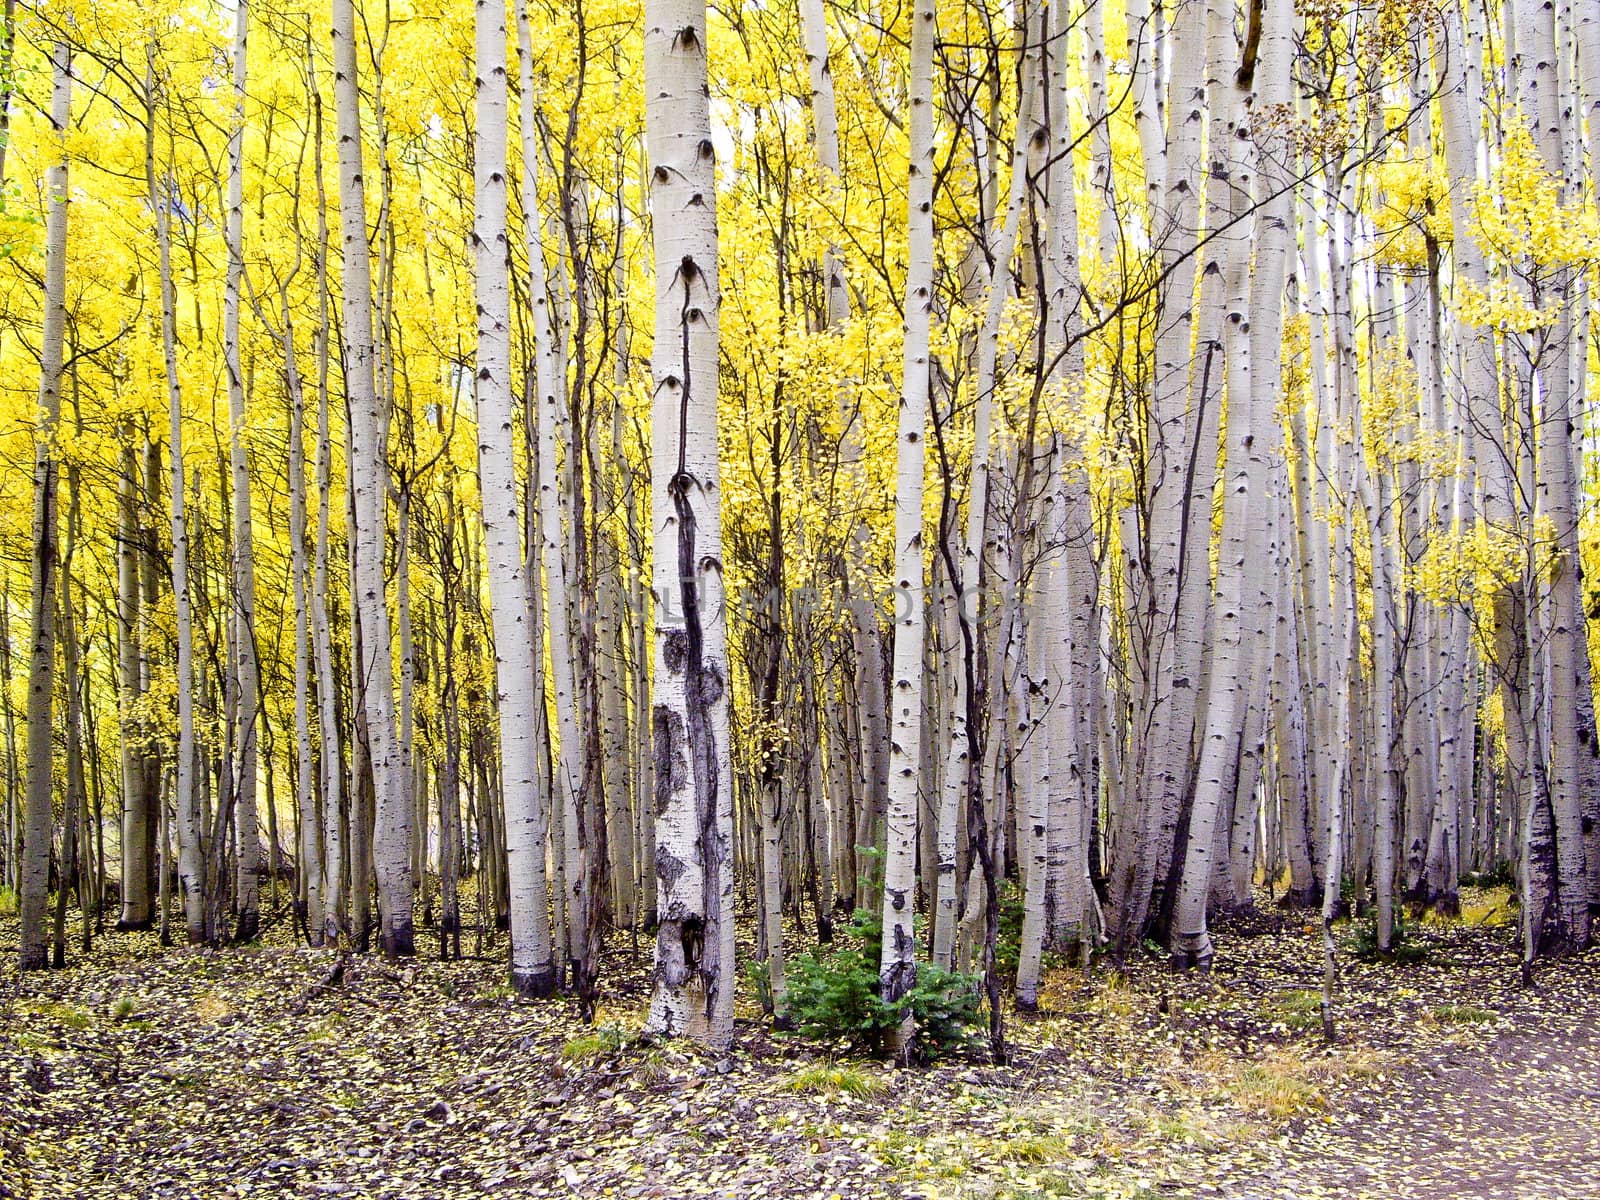 Stand of Colorado aspens in Fall